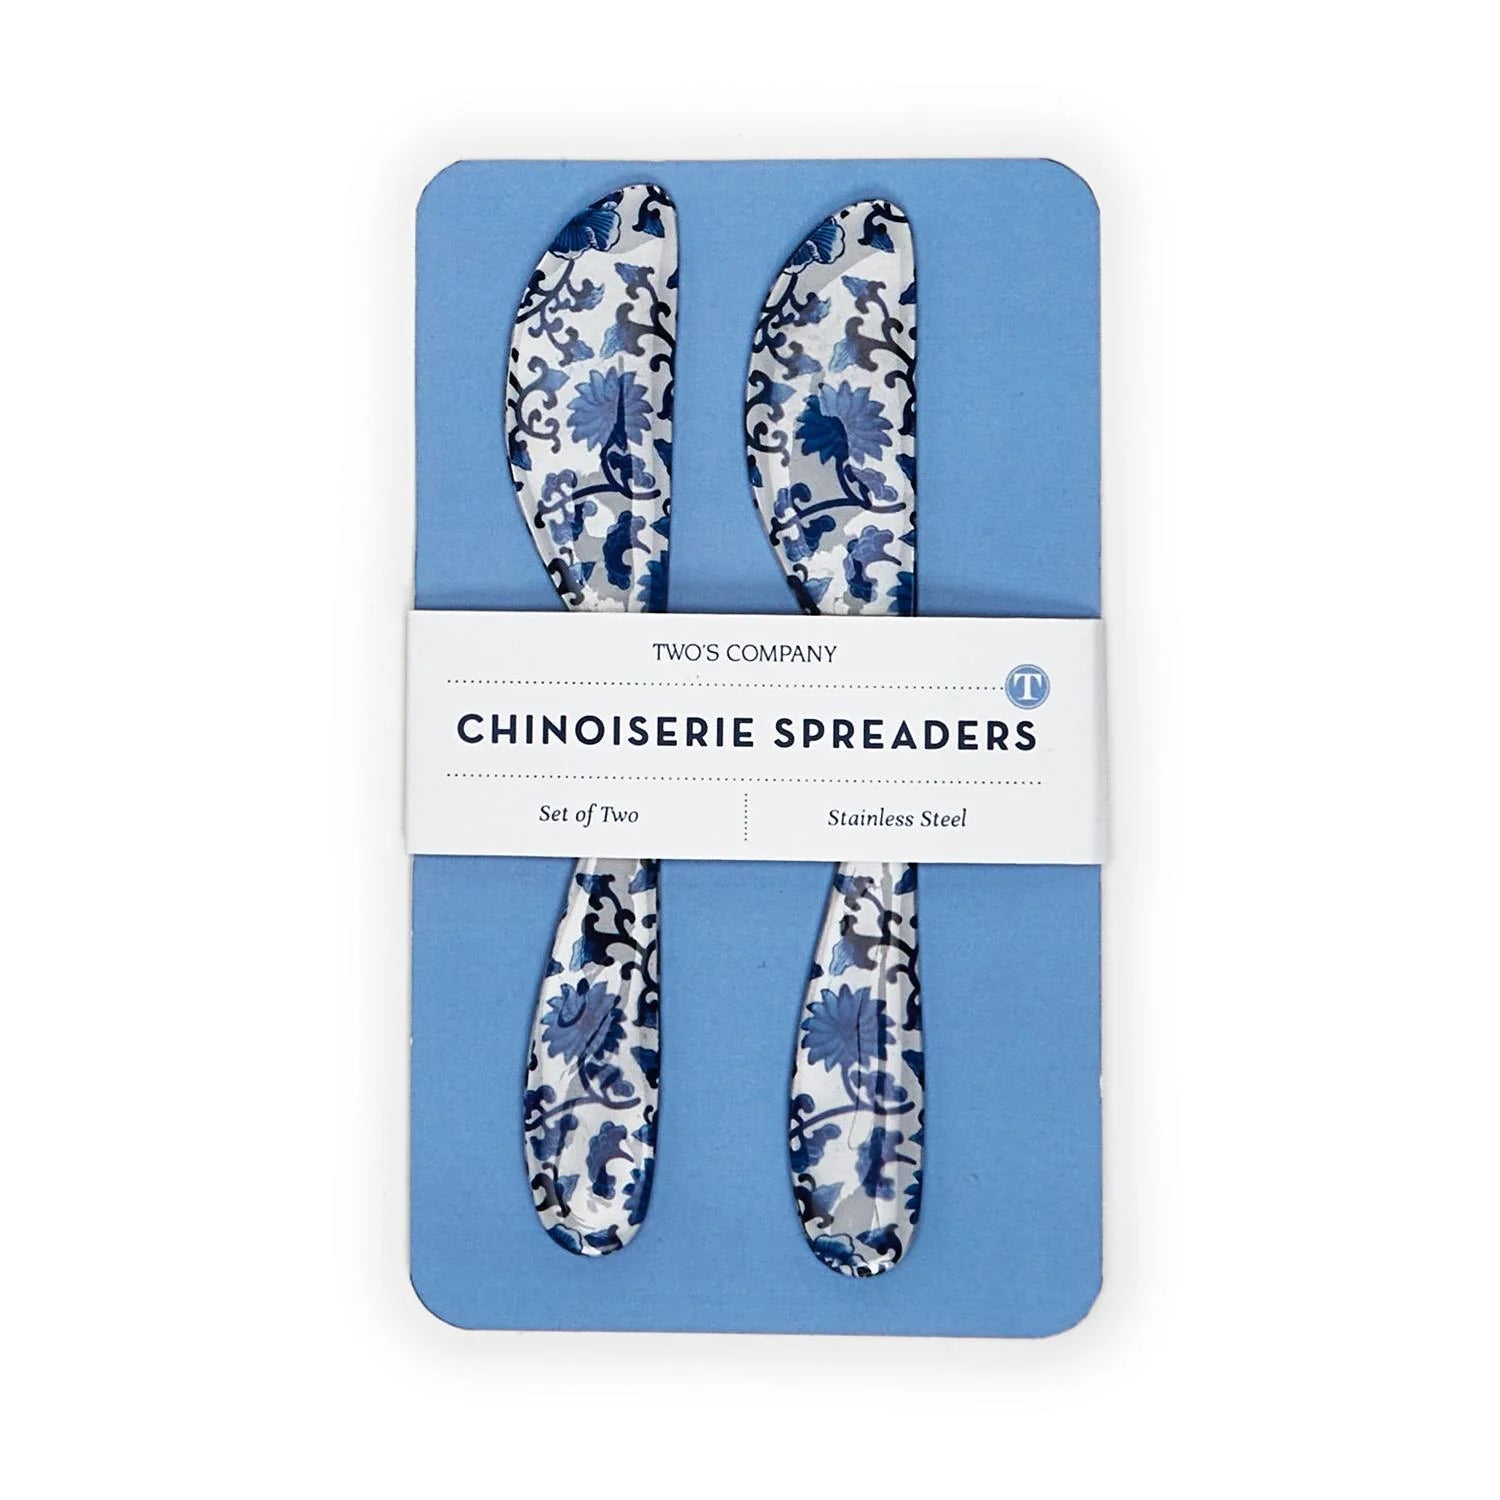 Chinoiserie Spreaders on Gift Card - Set of 2